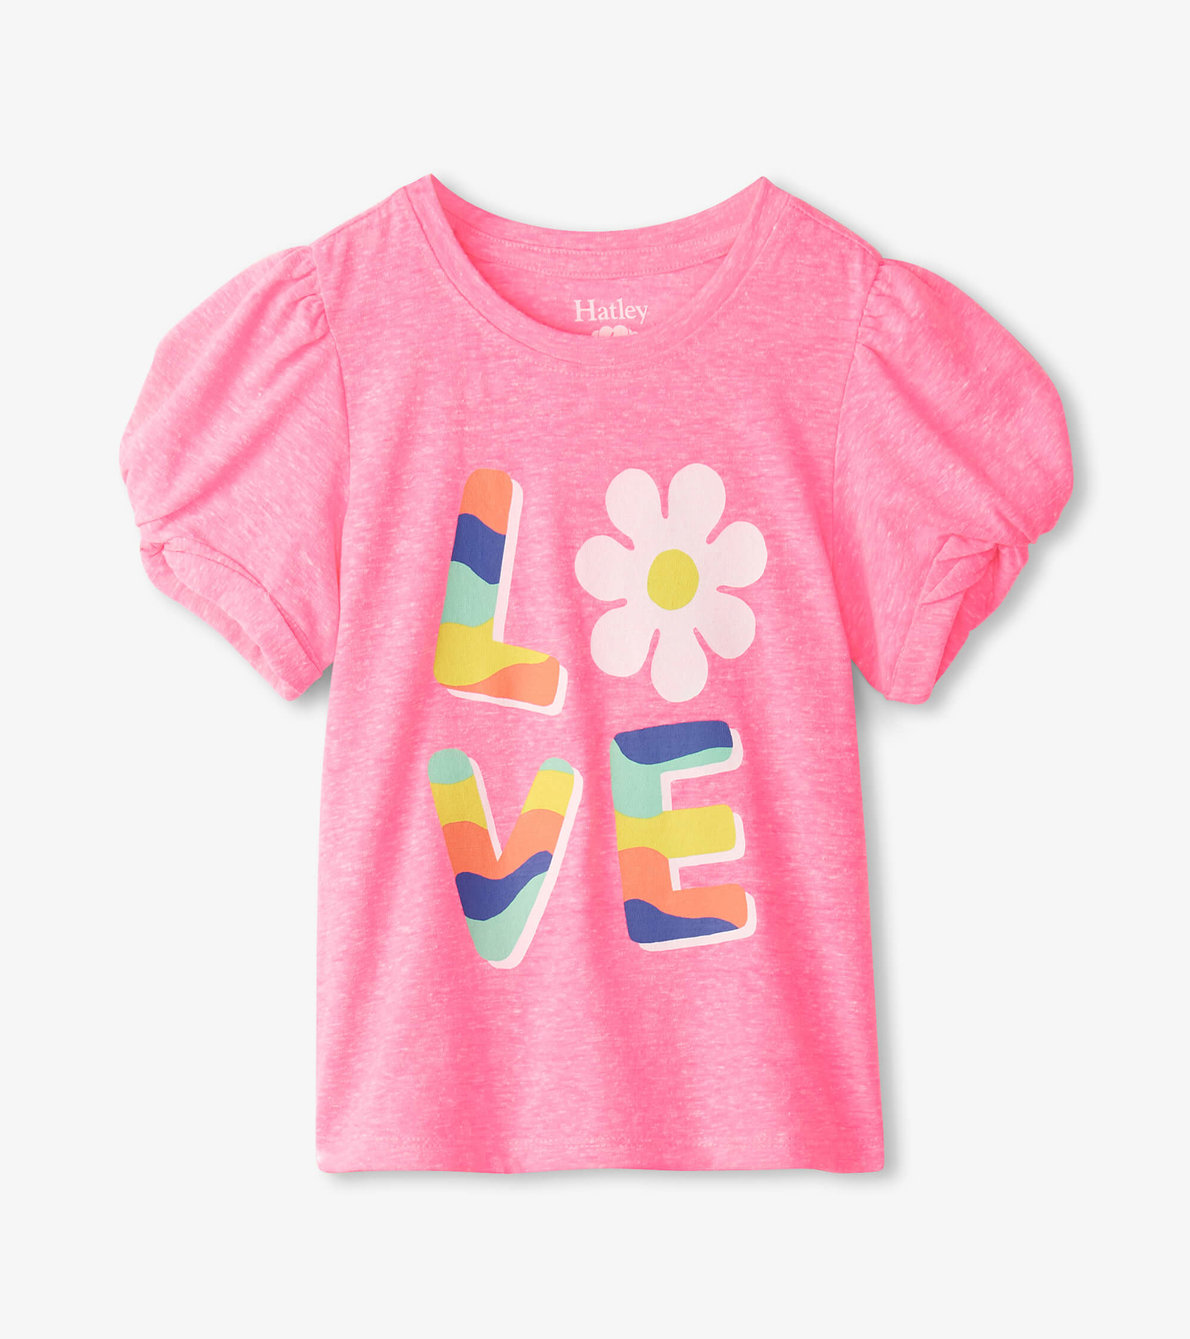 View larger image of Girls Love Twisted Sleeve Tee